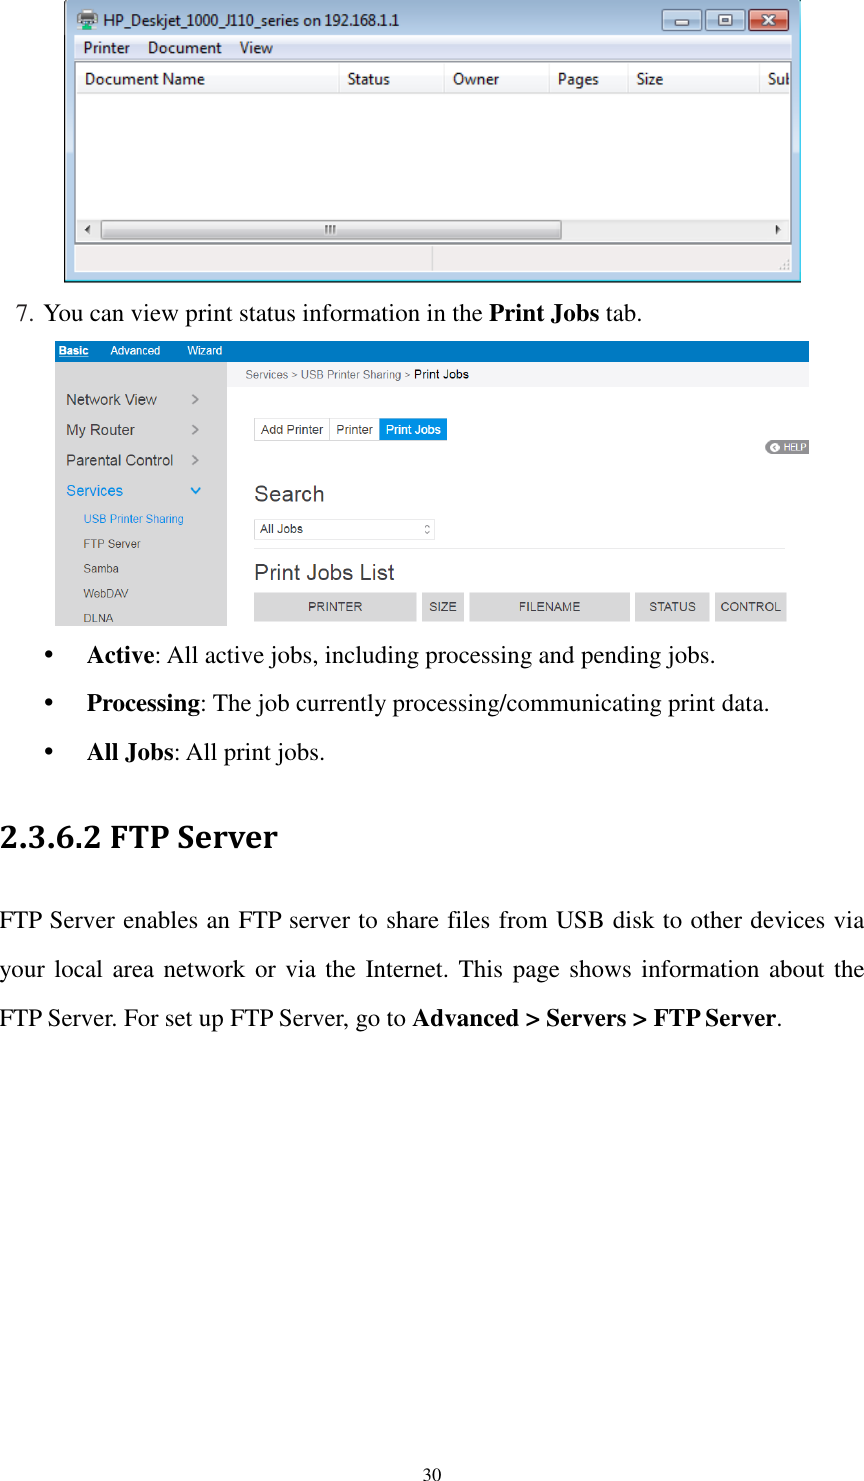  30  7. You can view print status information in the Print Jobs tab.   Active: All active jobs, including processing and pending jobs.  Processing: The job currently processing/communicating print data.  All Jobs: All print jobs. 2.3.6.2 FTP Server FTP Server enables an FTP server to share files from USB disk to other devices via your local area network or via the Internet. This page shows information about the FTP Server. For set up FTP Server, go to Advanced &gt; Servers &gt; FTP Server. 